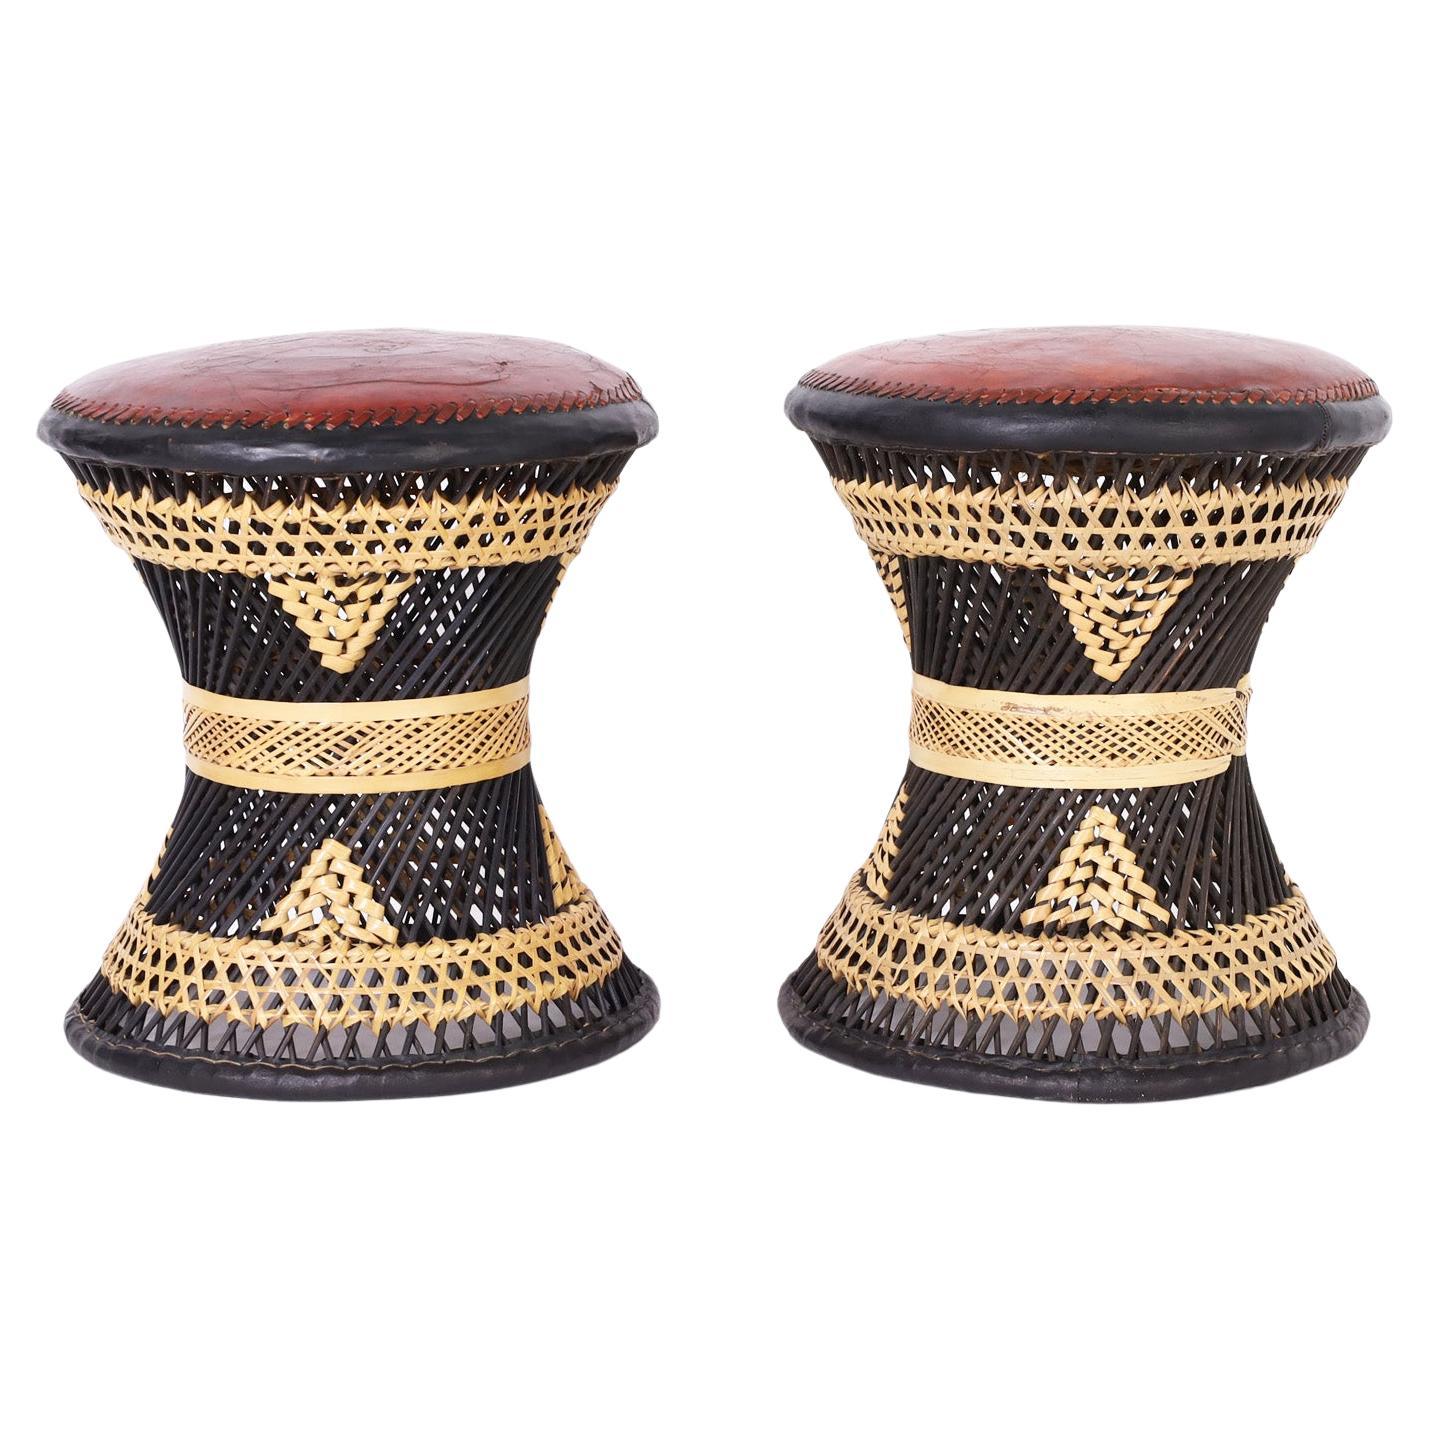 Pair of Leather and Wicker Anglo Indian Stools or Ottomans